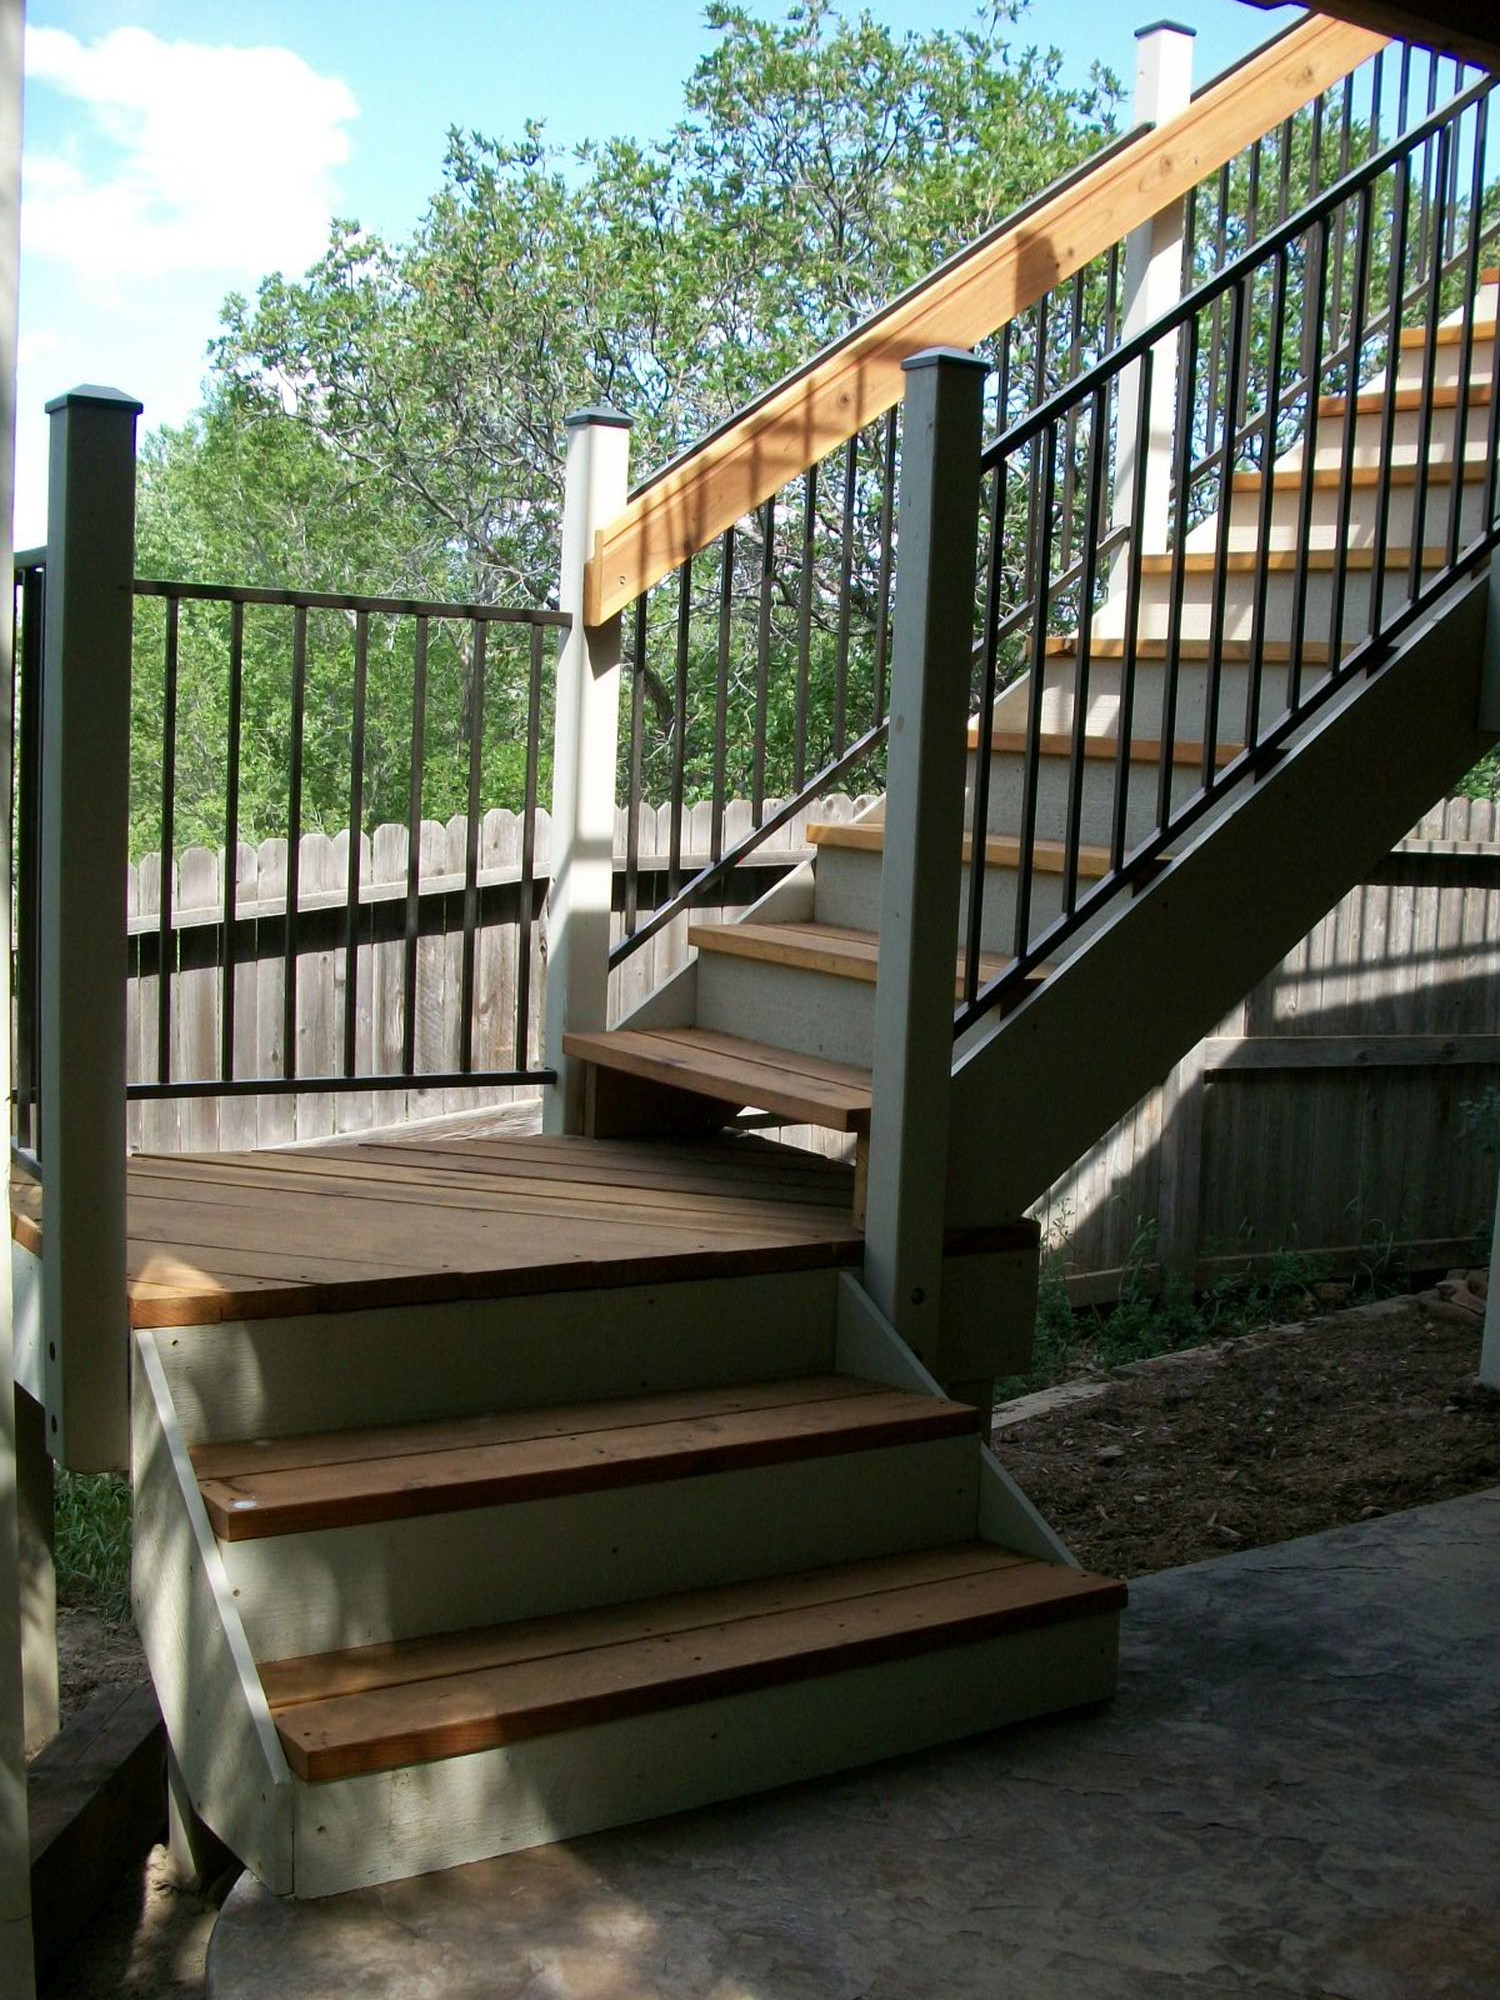 3'-wide closed deck stairs with a 90-degree turn landing, wood railing posts and handrail with metal baluster panels between the posts.